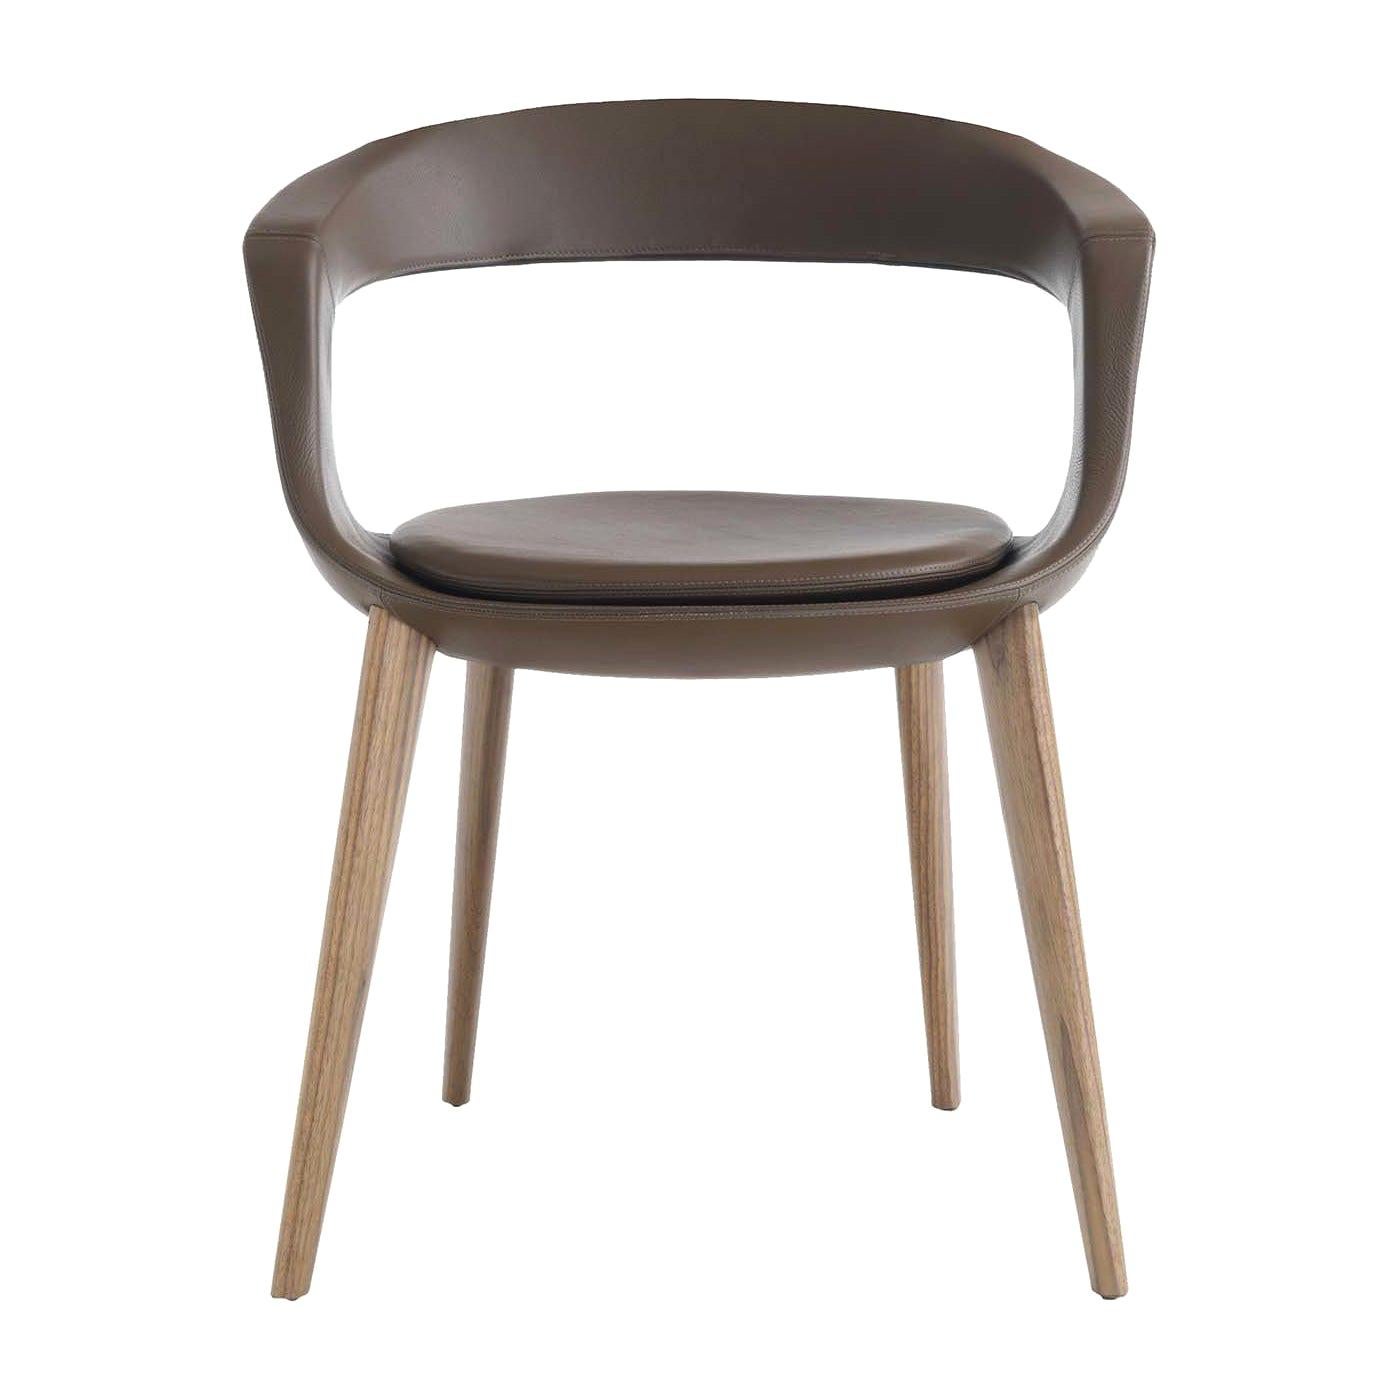 Frenchkiss Low-Backed Wooden-Legged Chair by Stefano Bigi